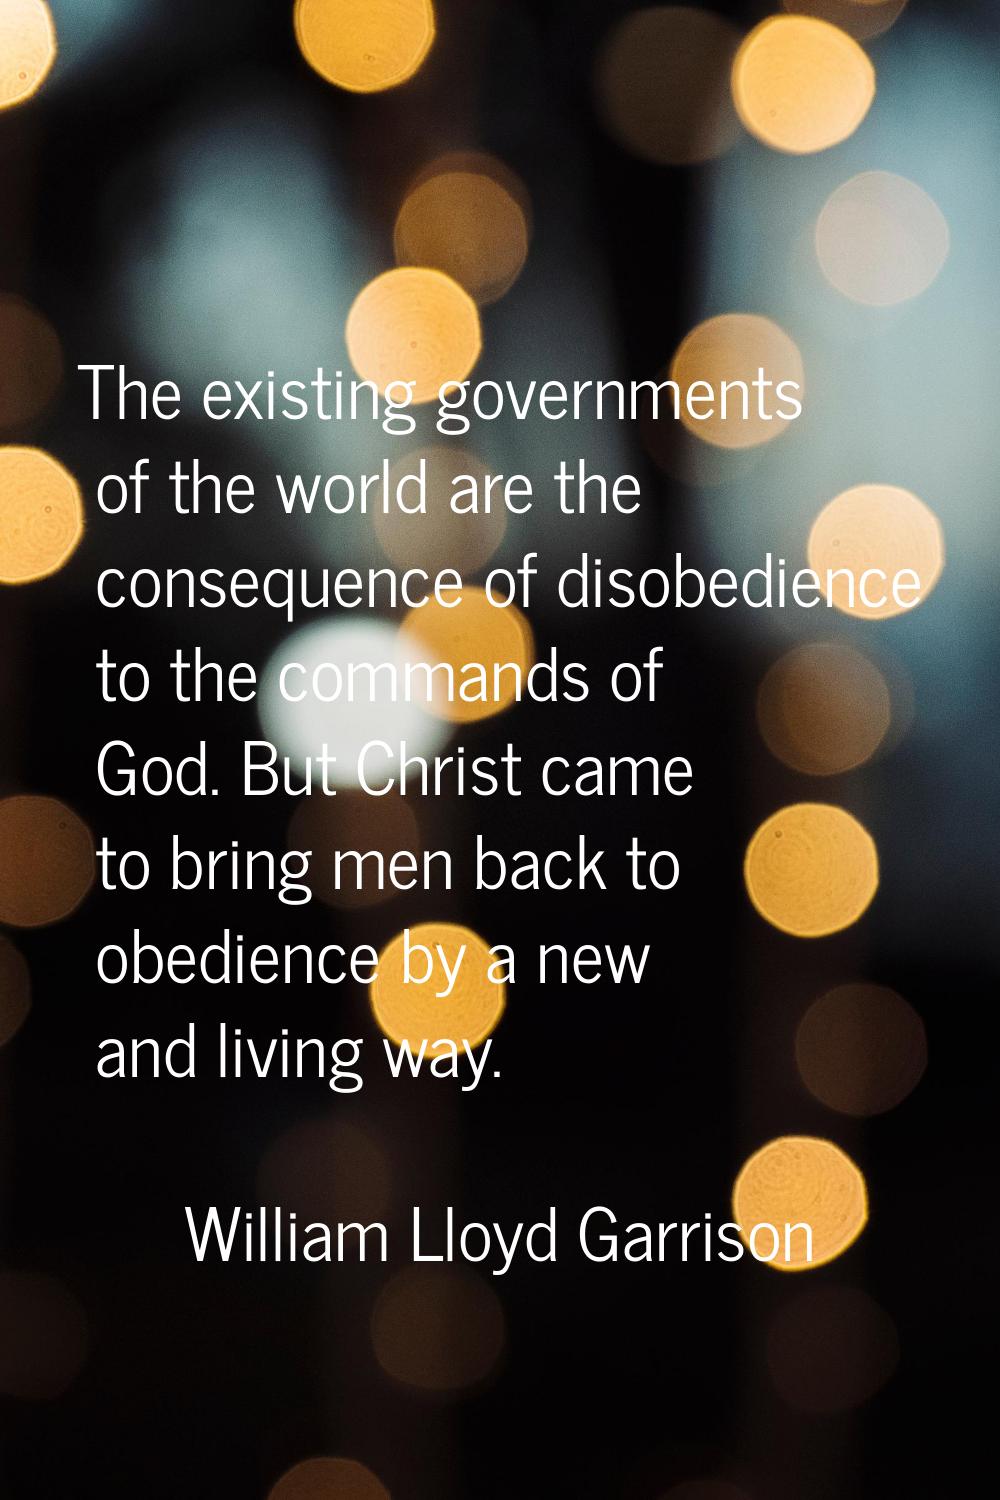 The existing governments of the world are the consequence of disobedience to the commands of God. B